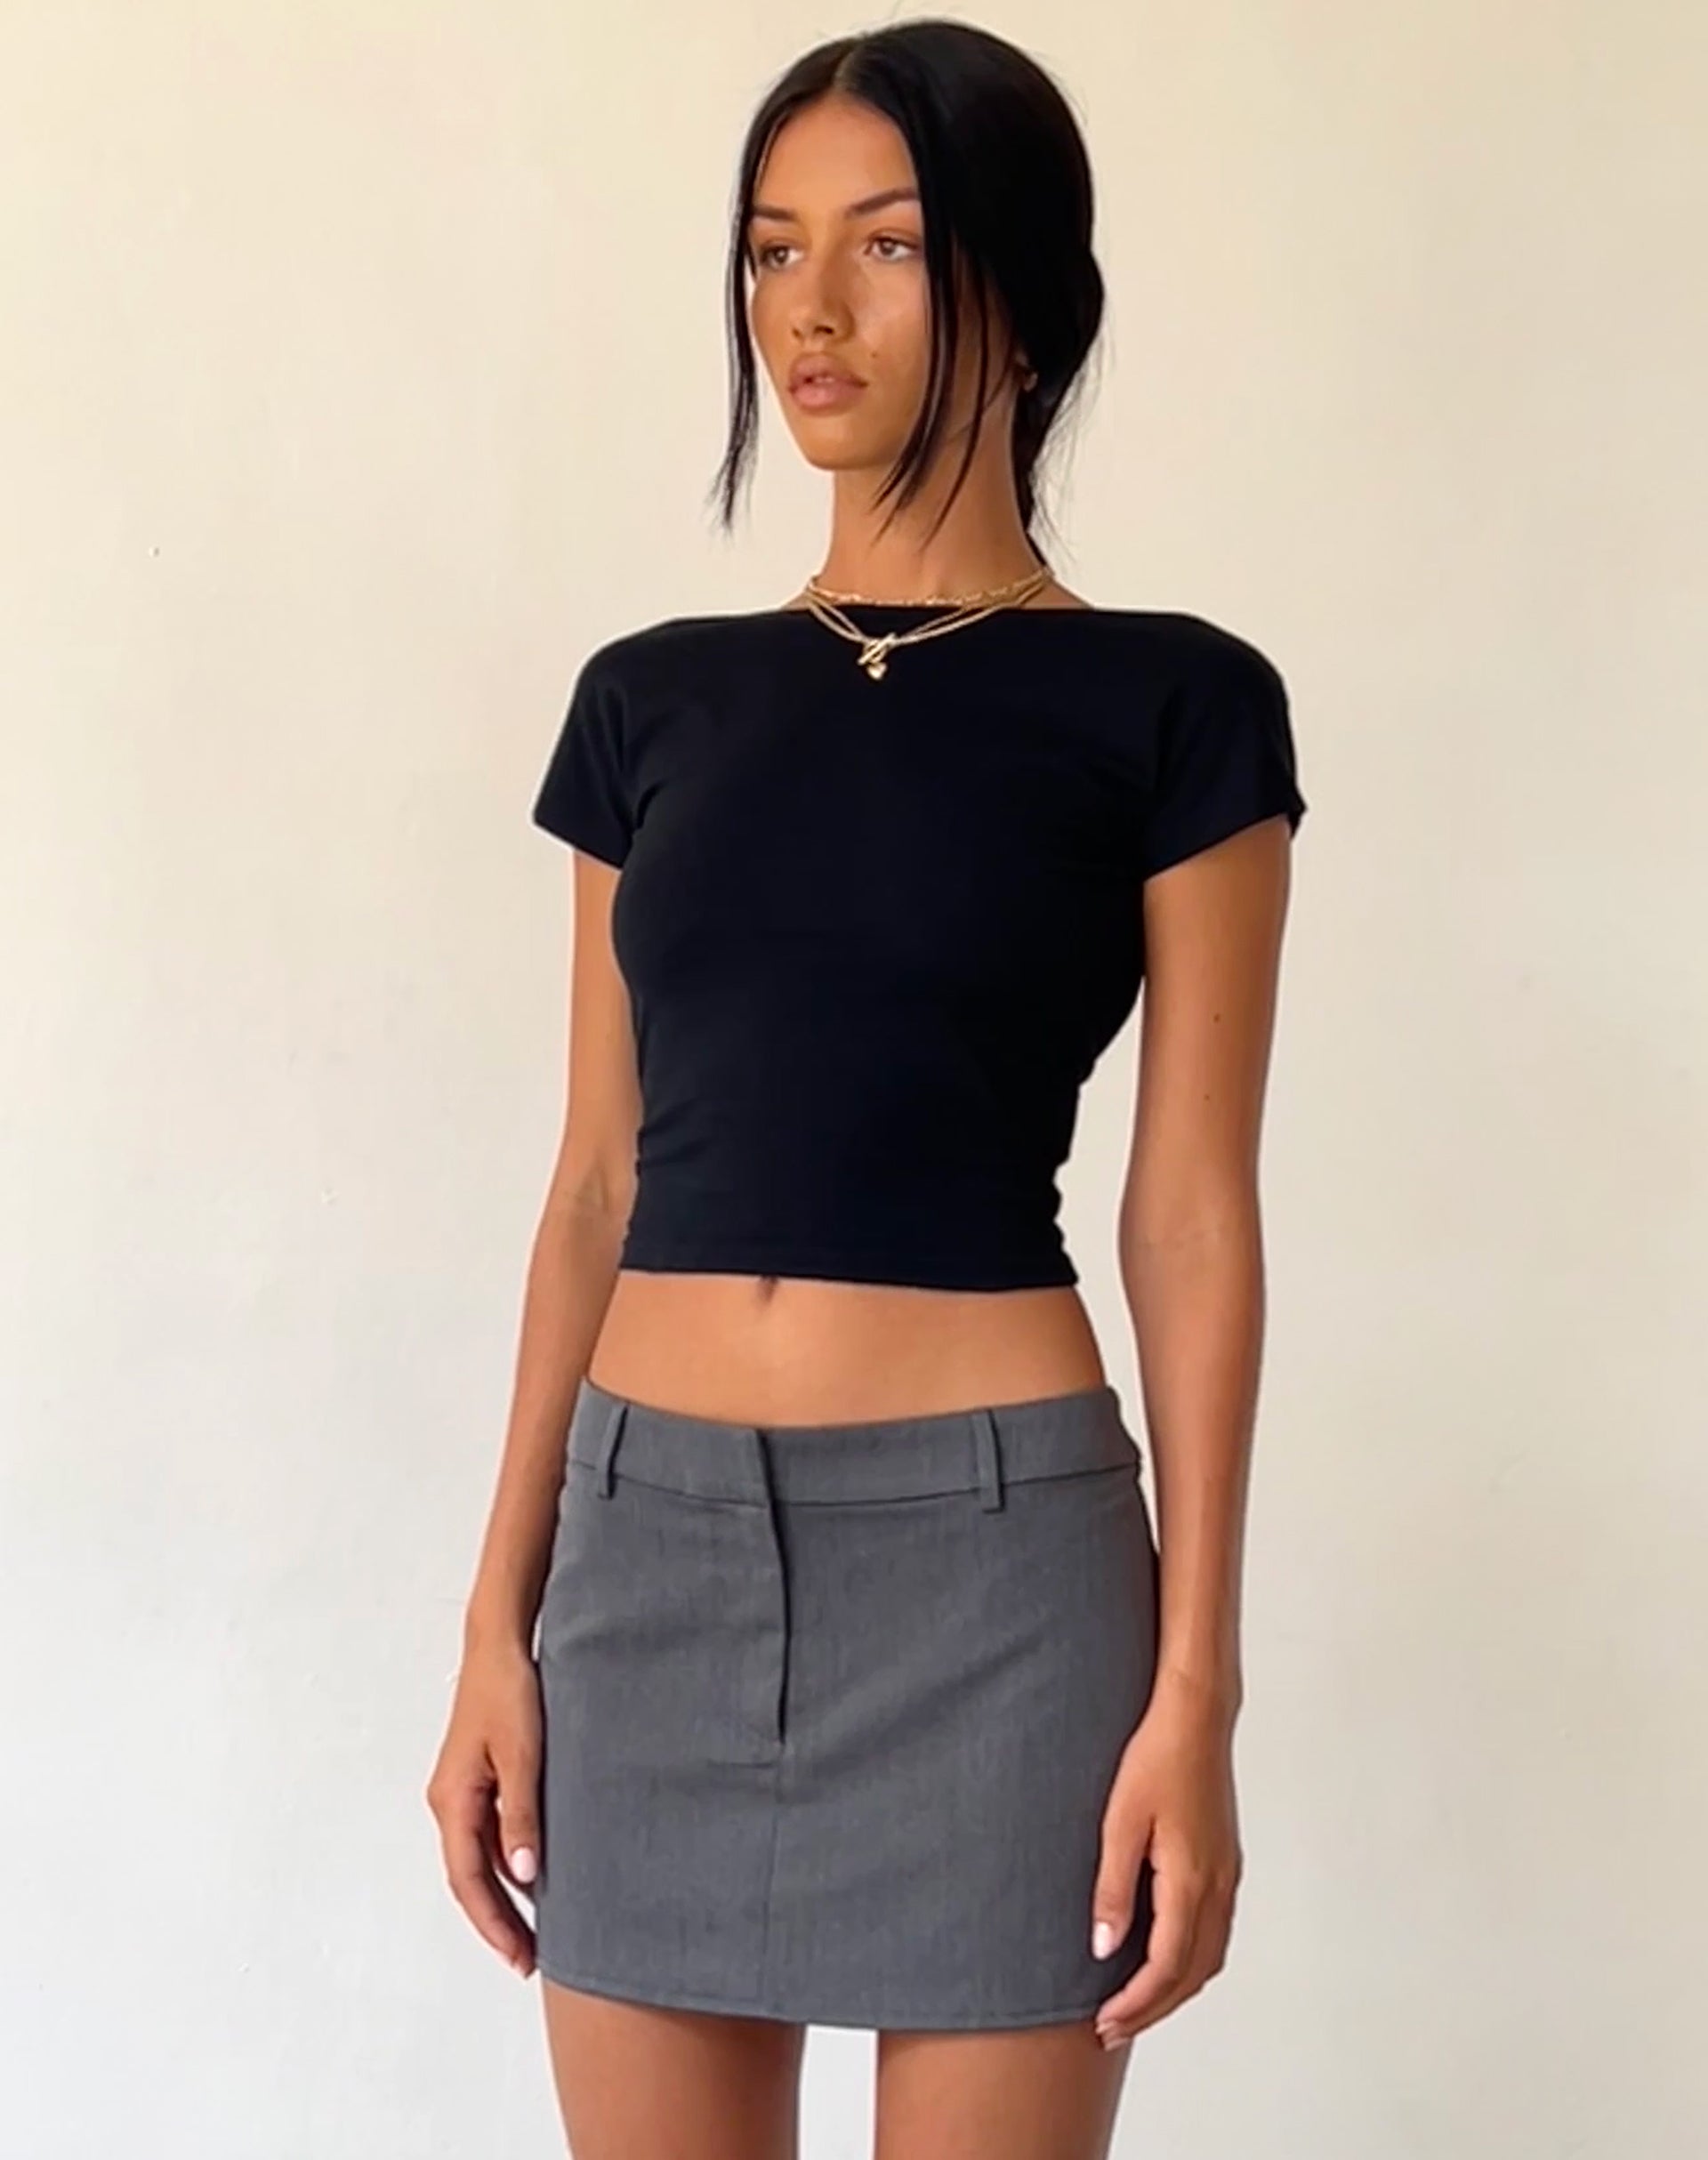 Image of Sukra Mini Tailored Skirt in Charcoal